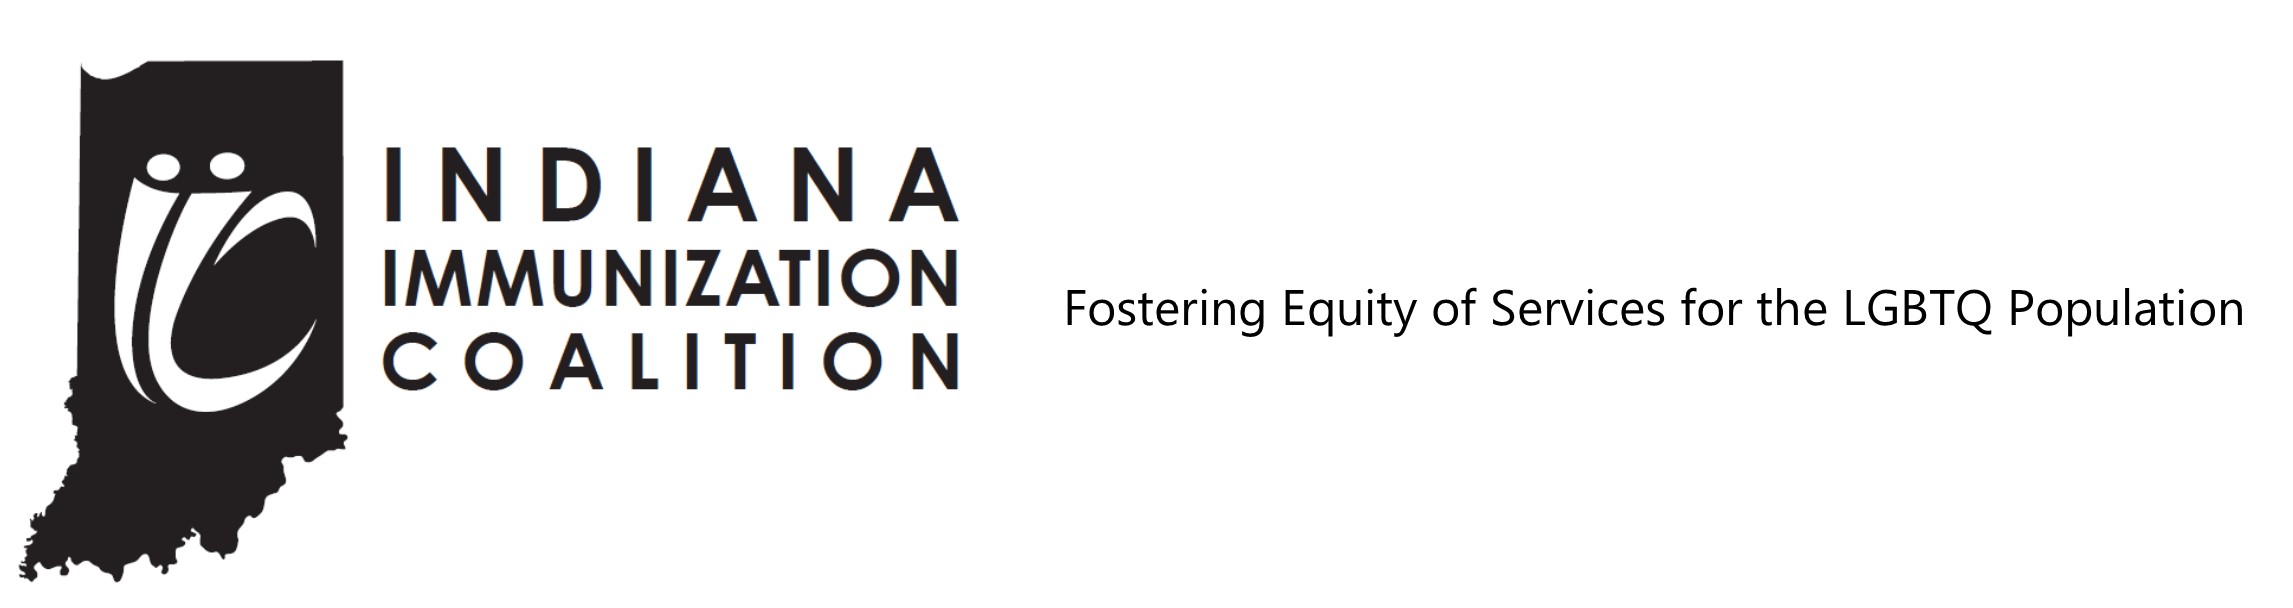 Fostering Equity of Services for the LGBTQ Population Webinar Banner